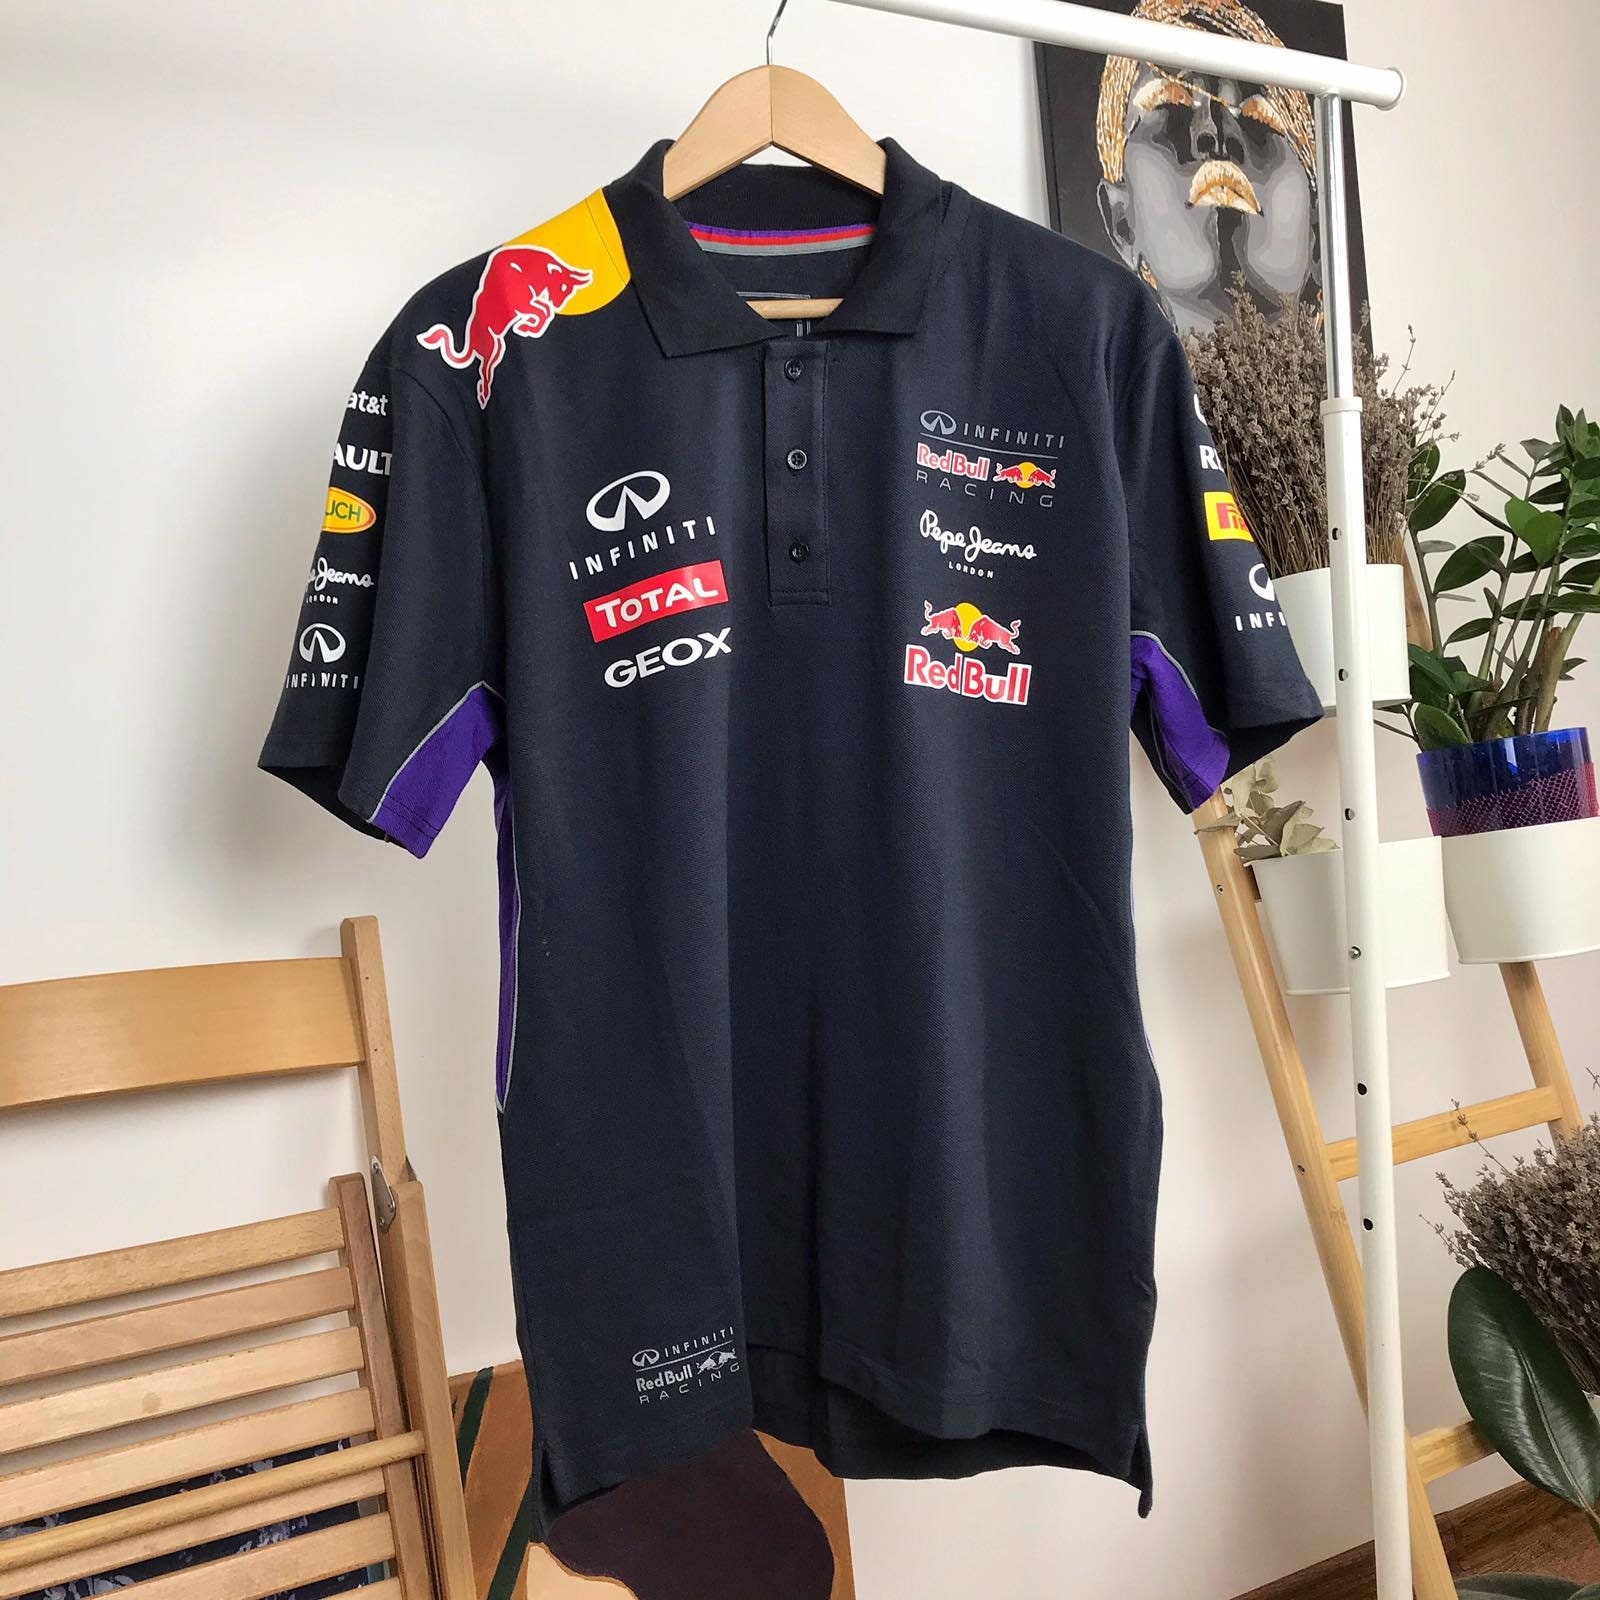 bevestig alstublieft barricade plotseling Mens Pepe Jeans F1 RED BULL Racing Jersey Polo Shirt Size XL - Etsy